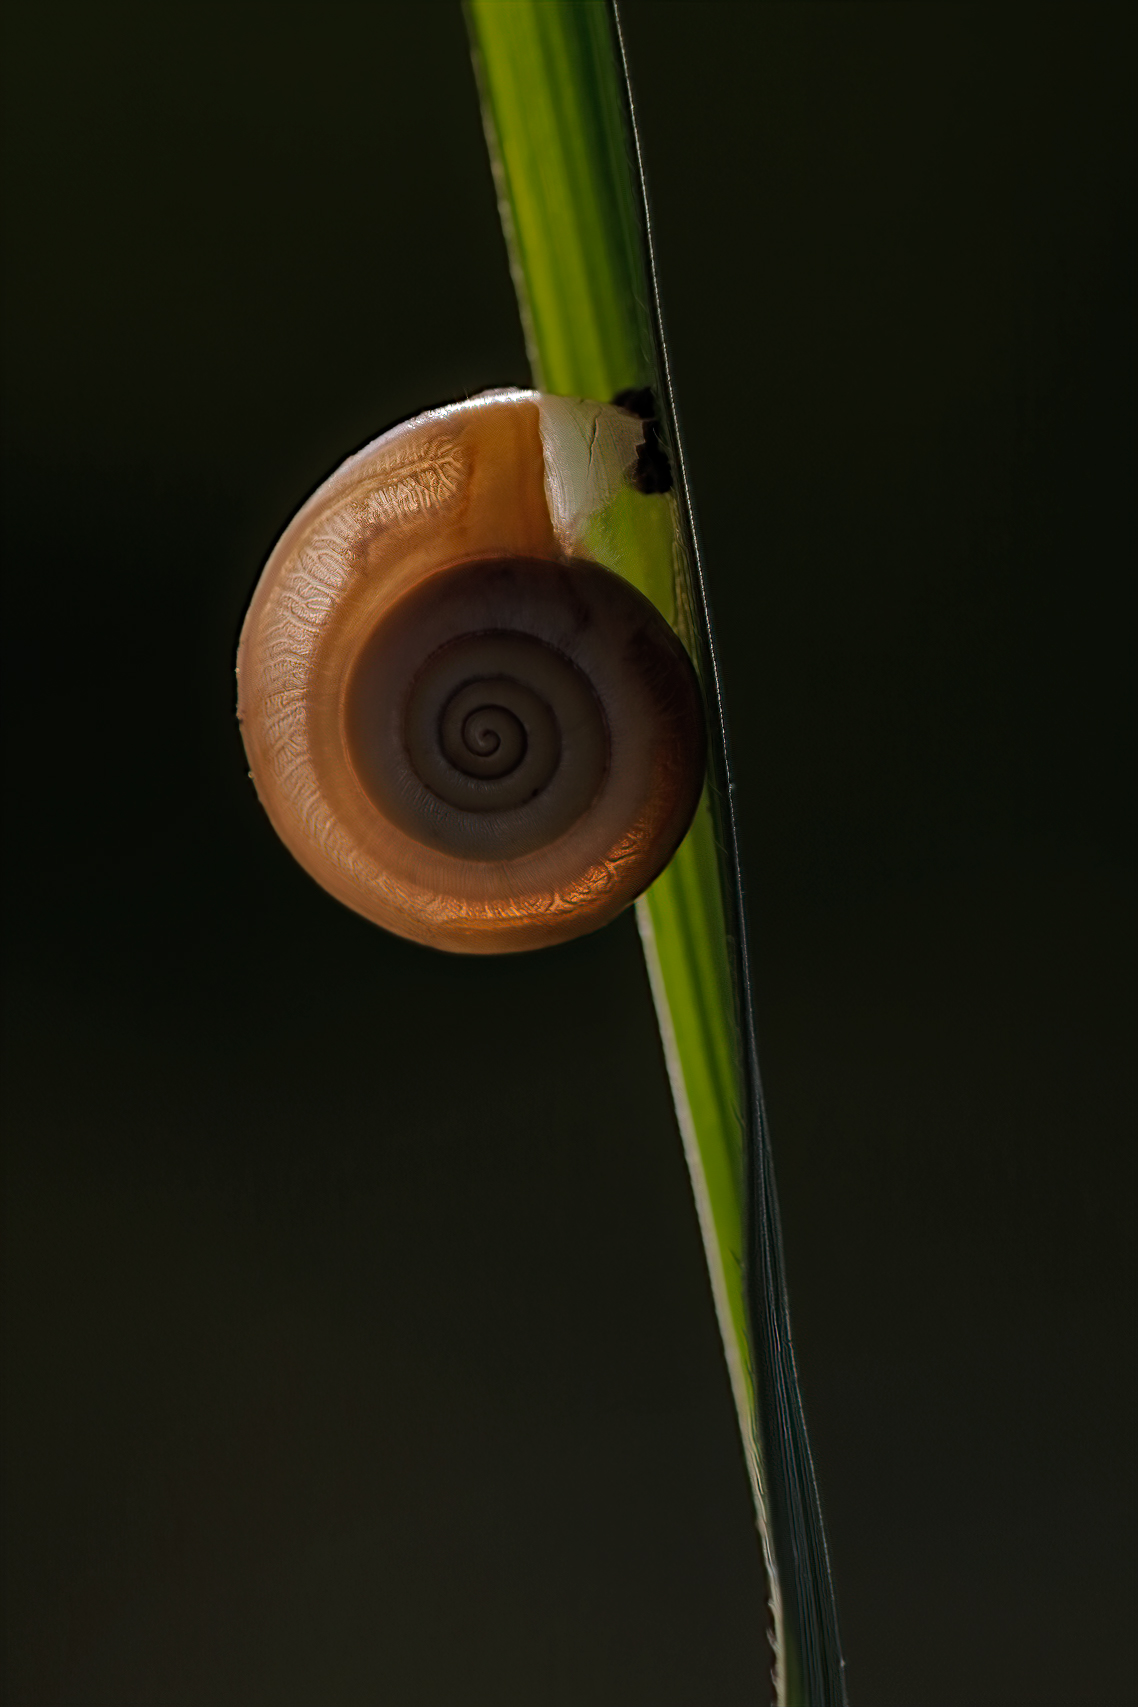 Snail shell sticked to a reed leaf.